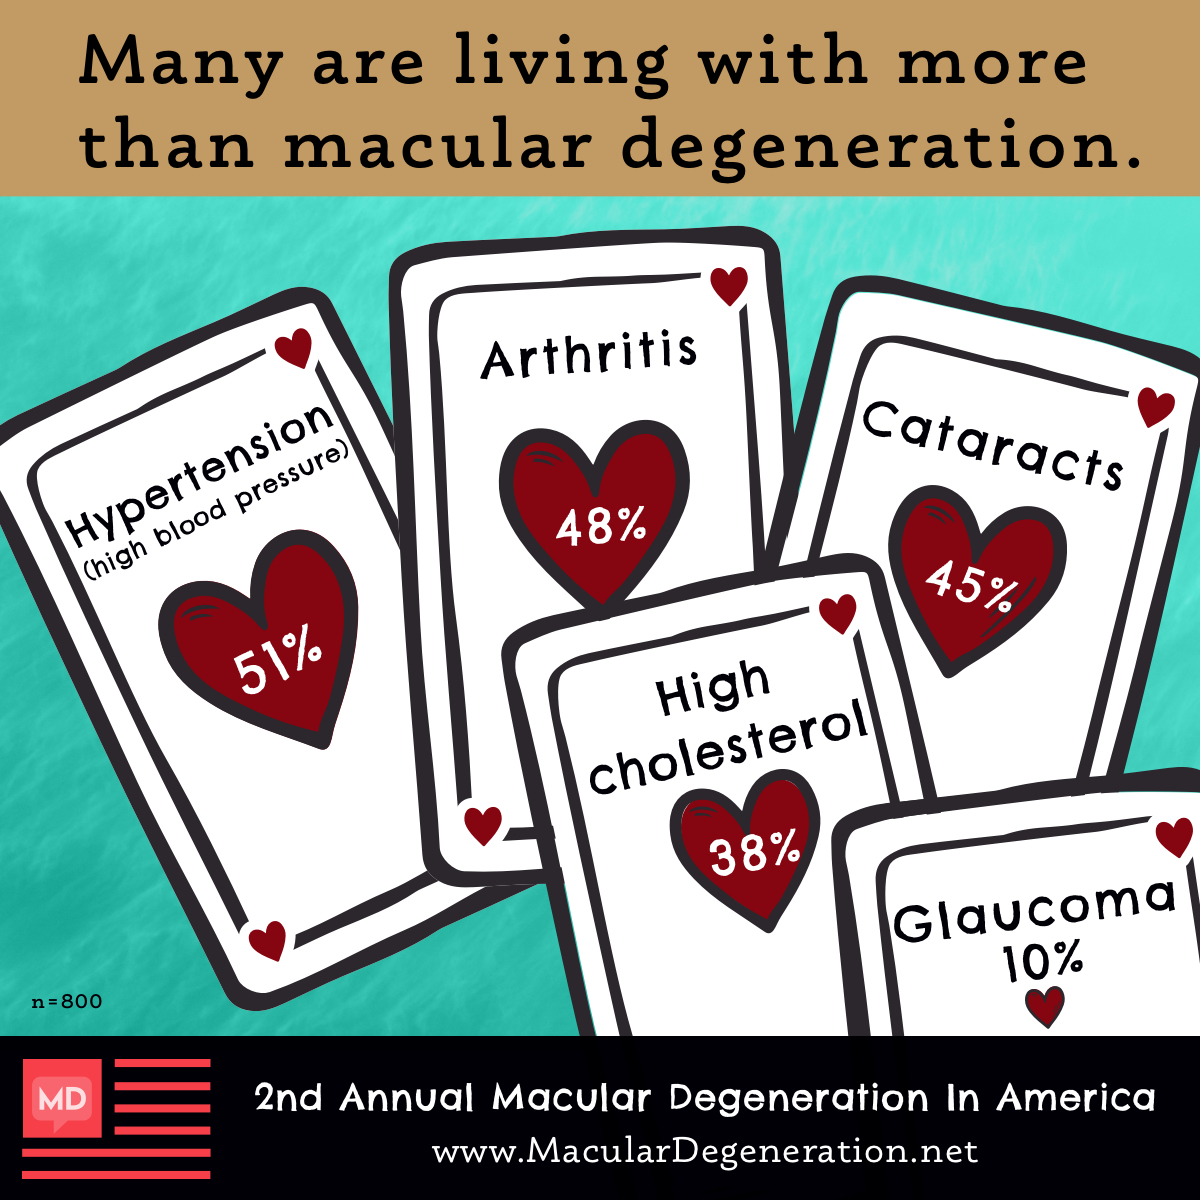 Respondents of the macular degeneration In America survey report having high blood pressure, arthritis, high cholesterol, cataracts, and glaucoma.